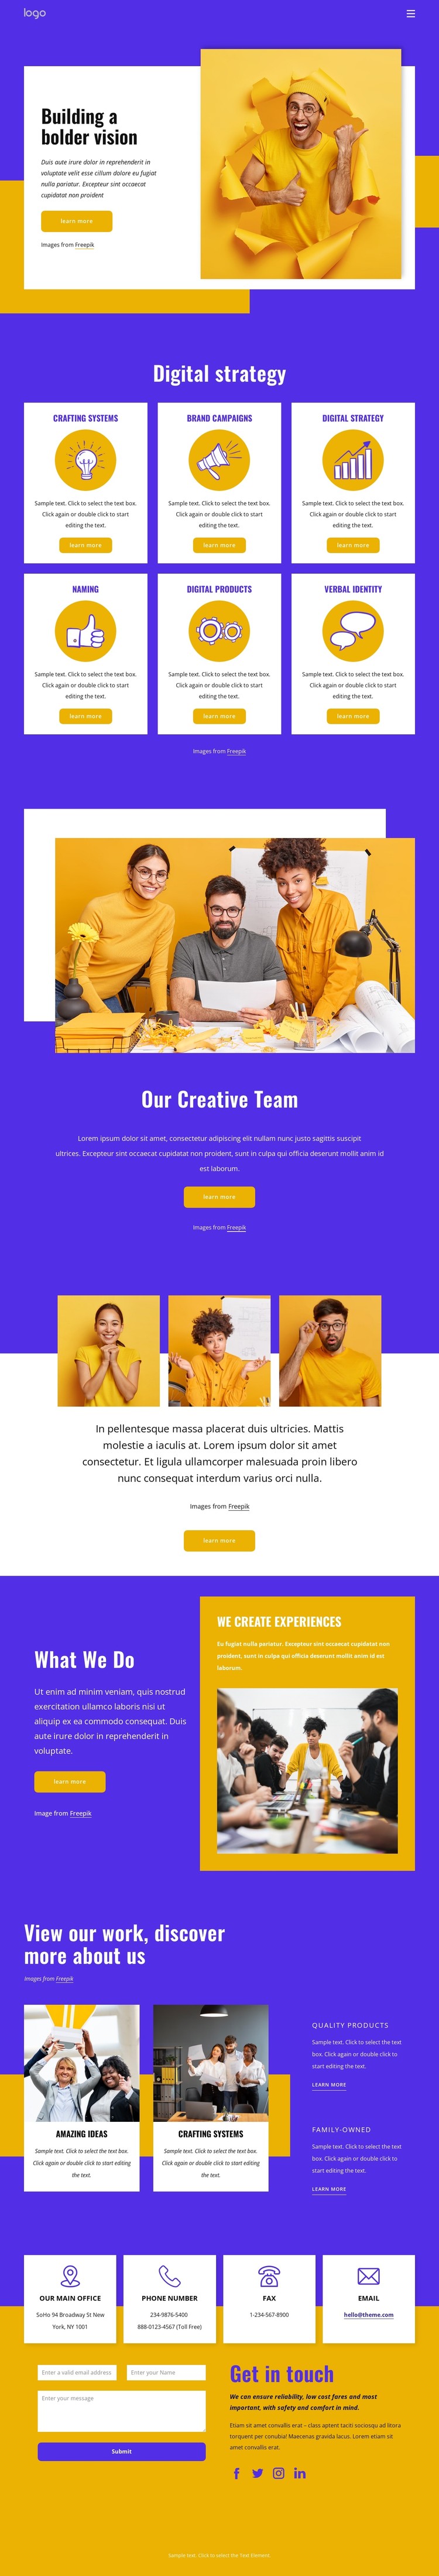 UX design and branding agency CSS Template